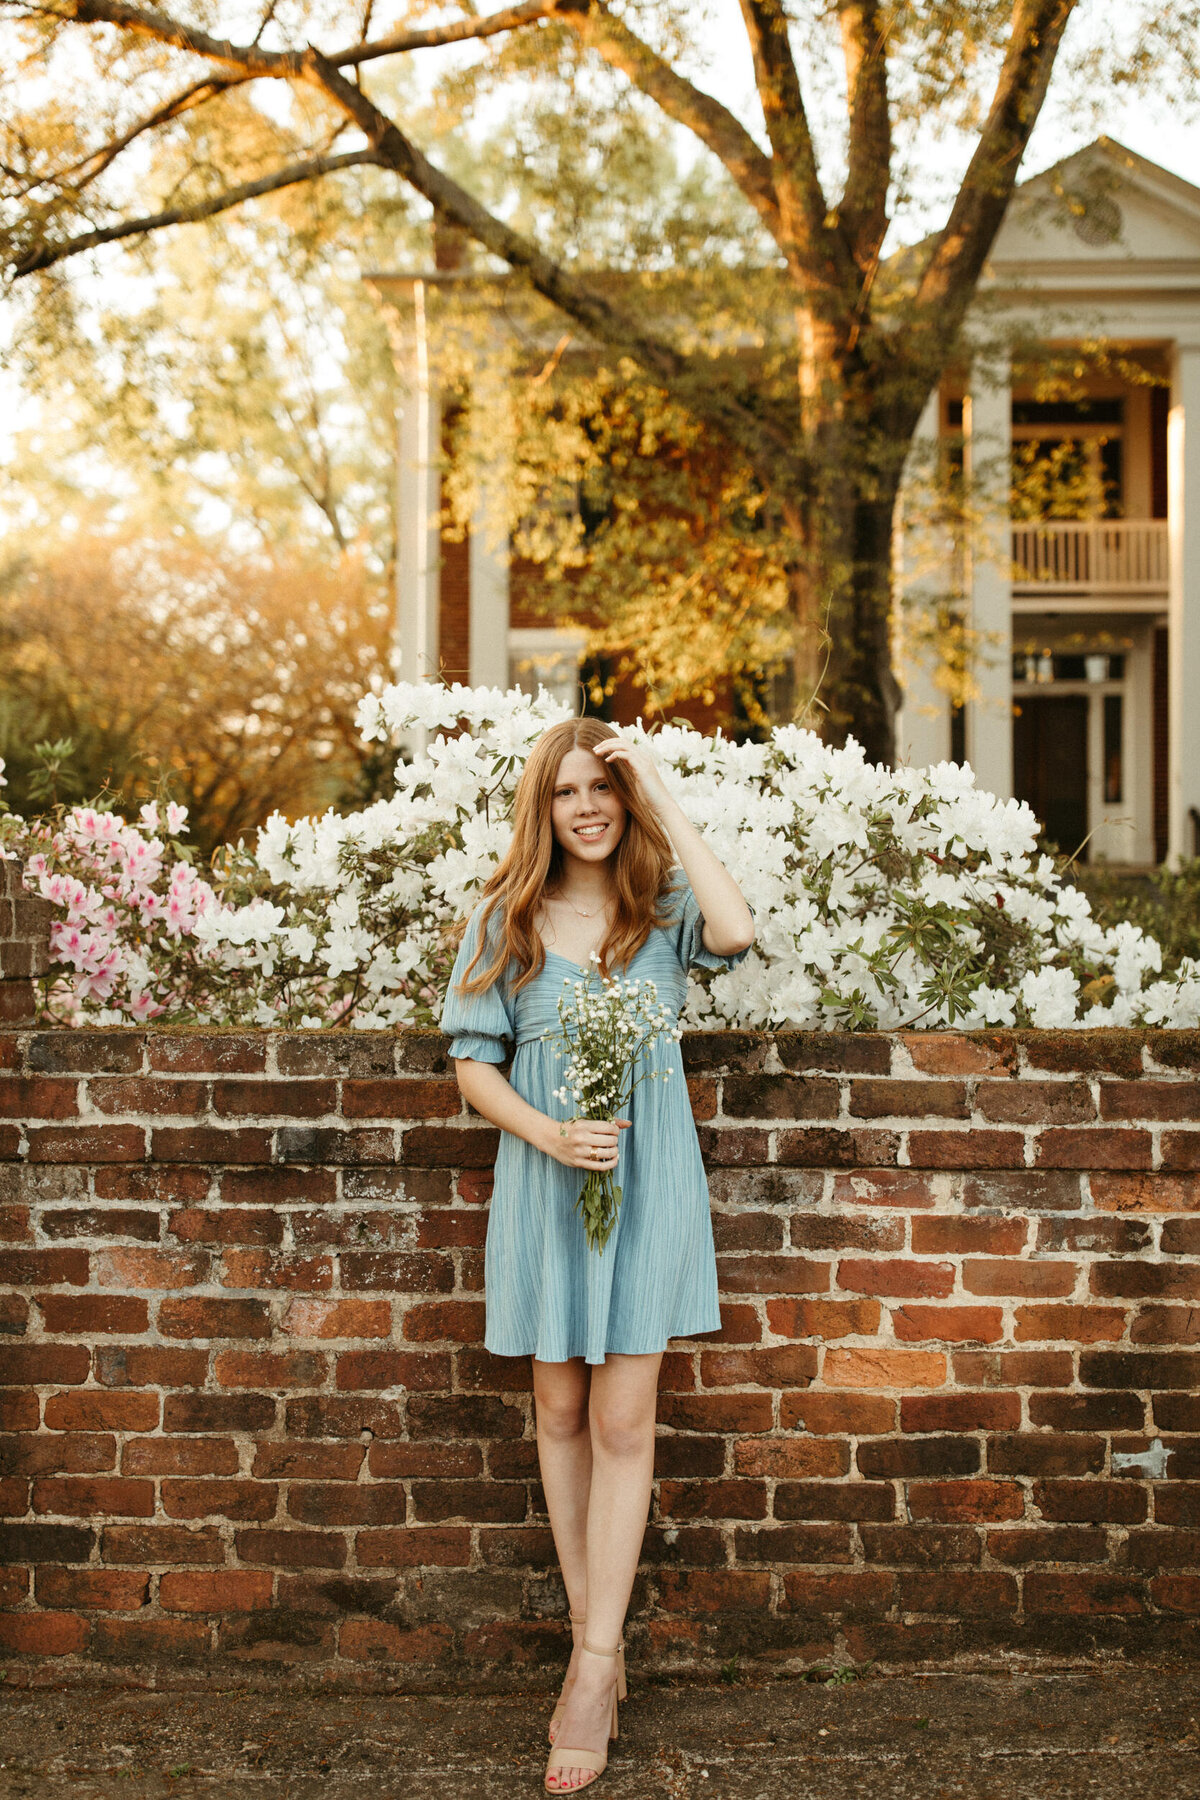 Girl senior in short blue dress standing in front of a brick fence on a sidewalk downtown